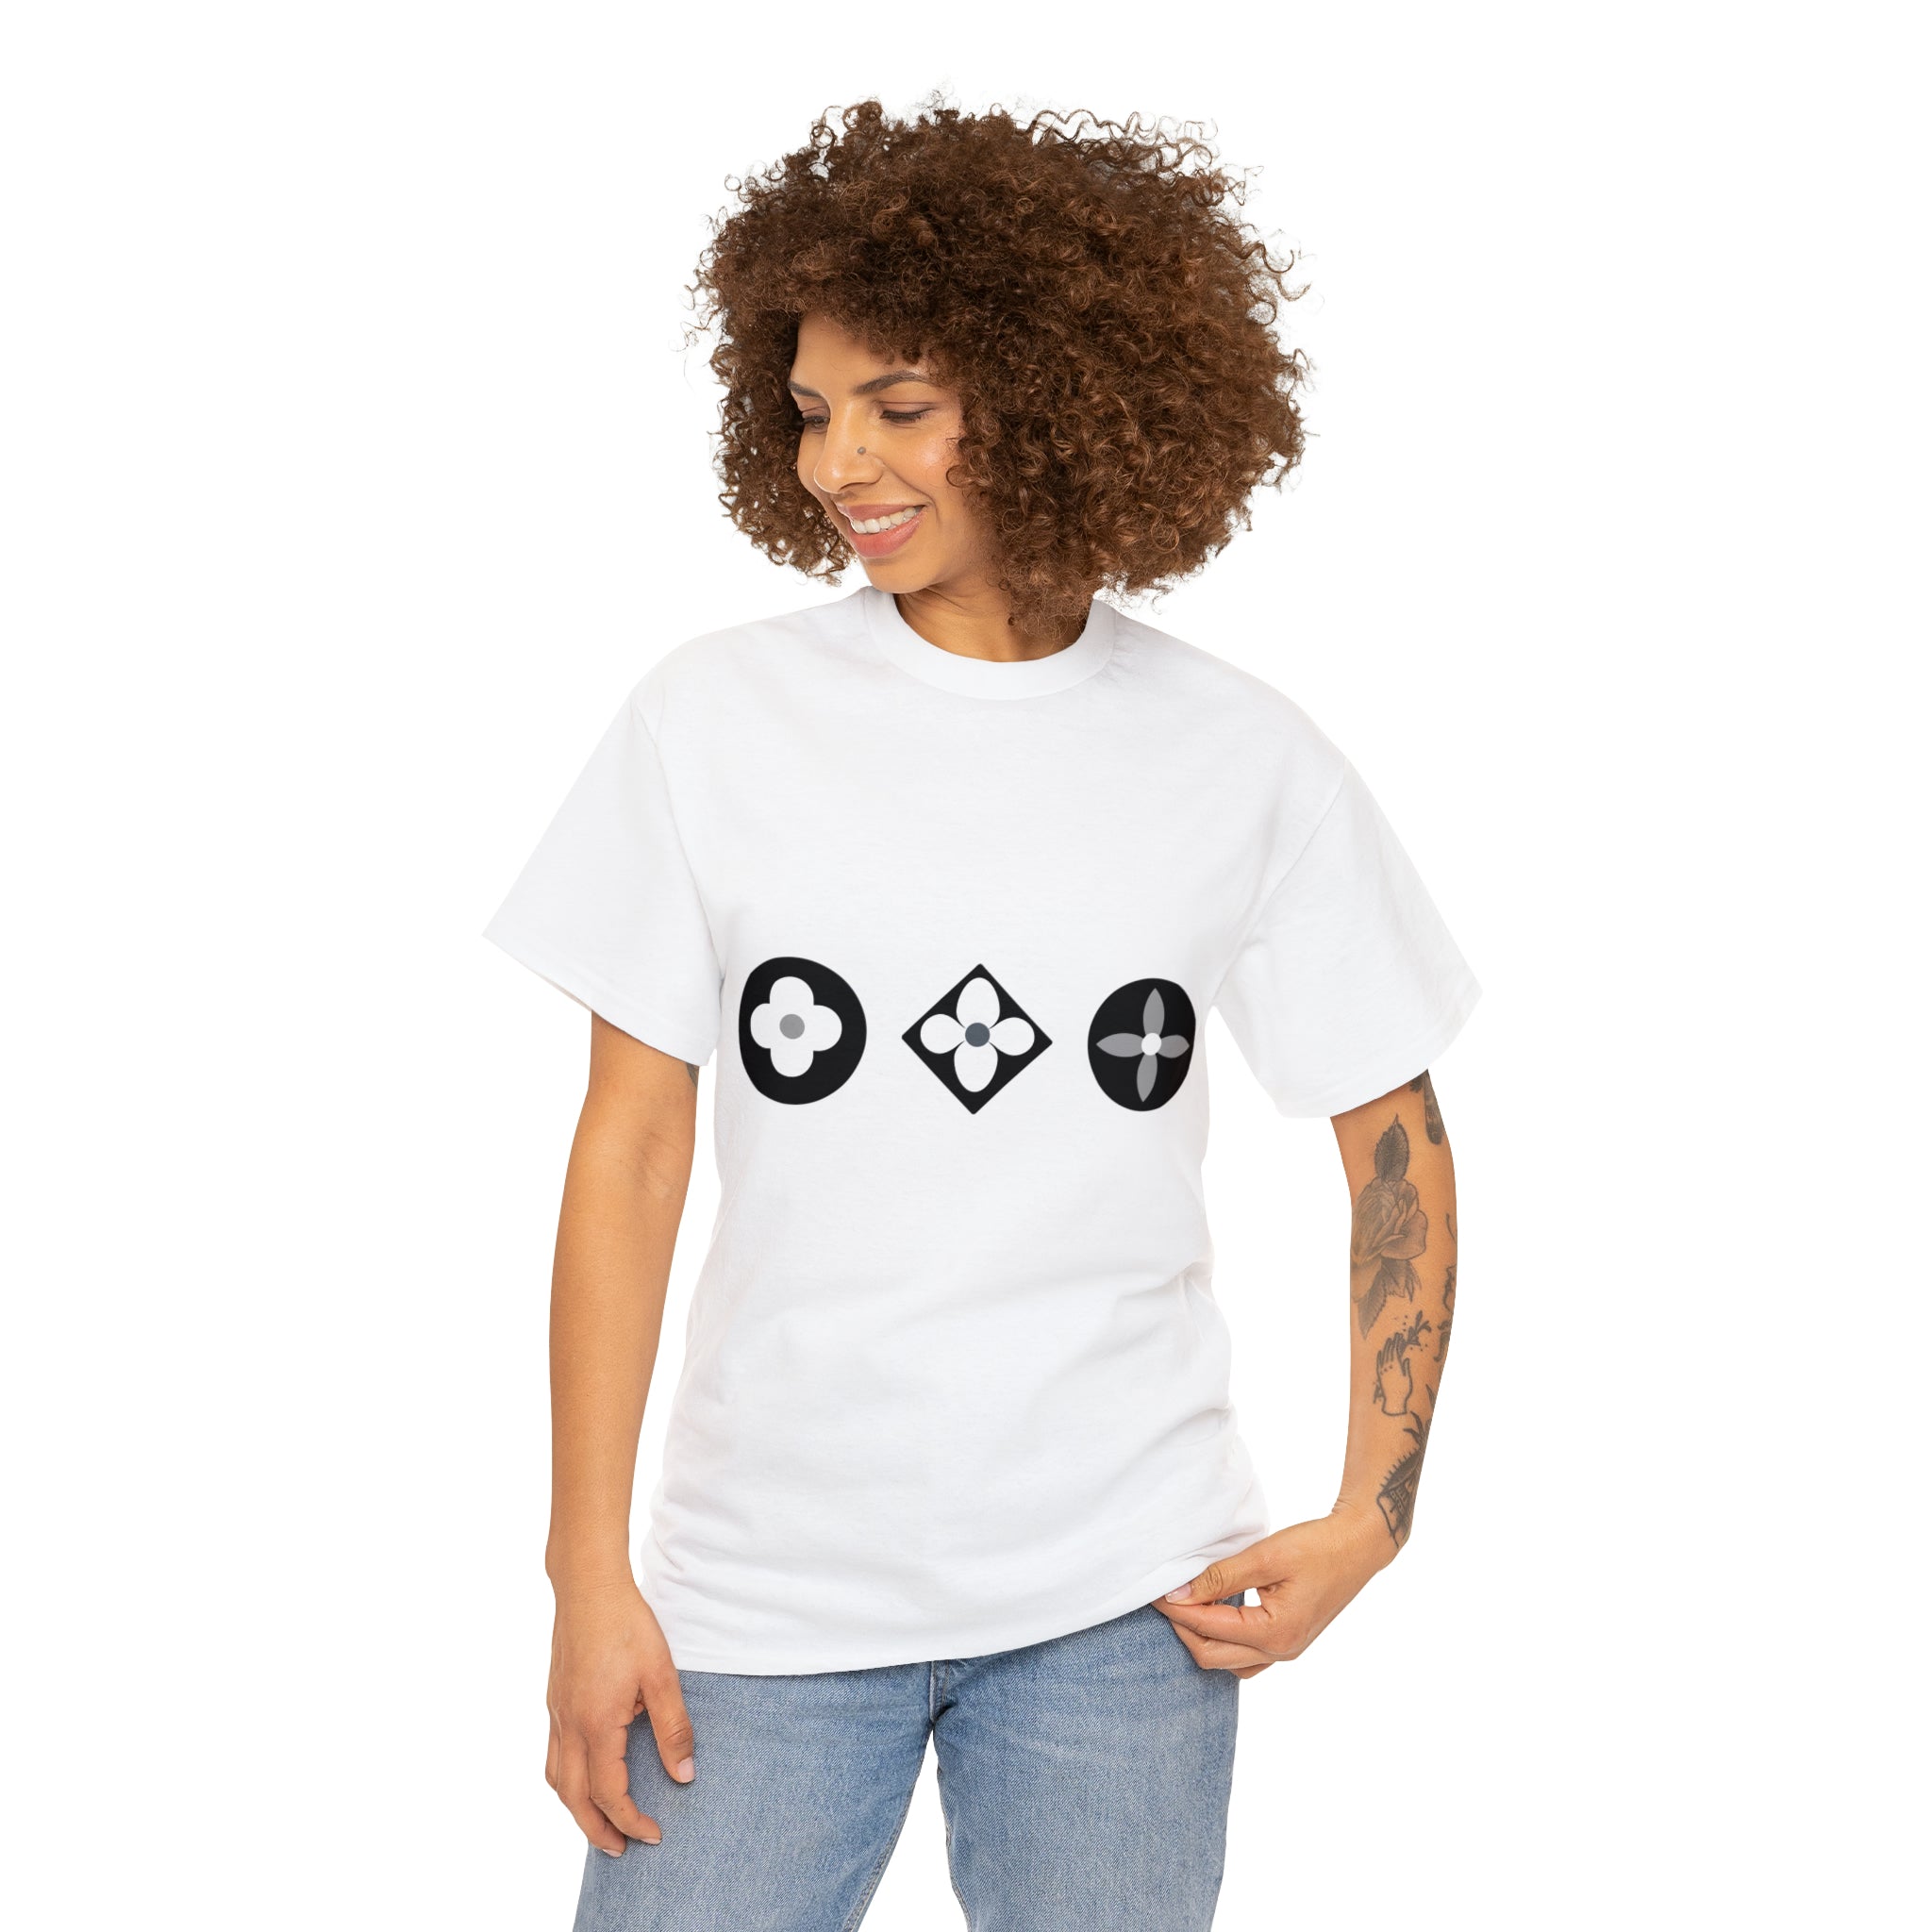 Groove Collection Trilogy of Icons Black and White Unisex Relaxed Fit Heavy Cotton Tee, Gender Neutral TShirt